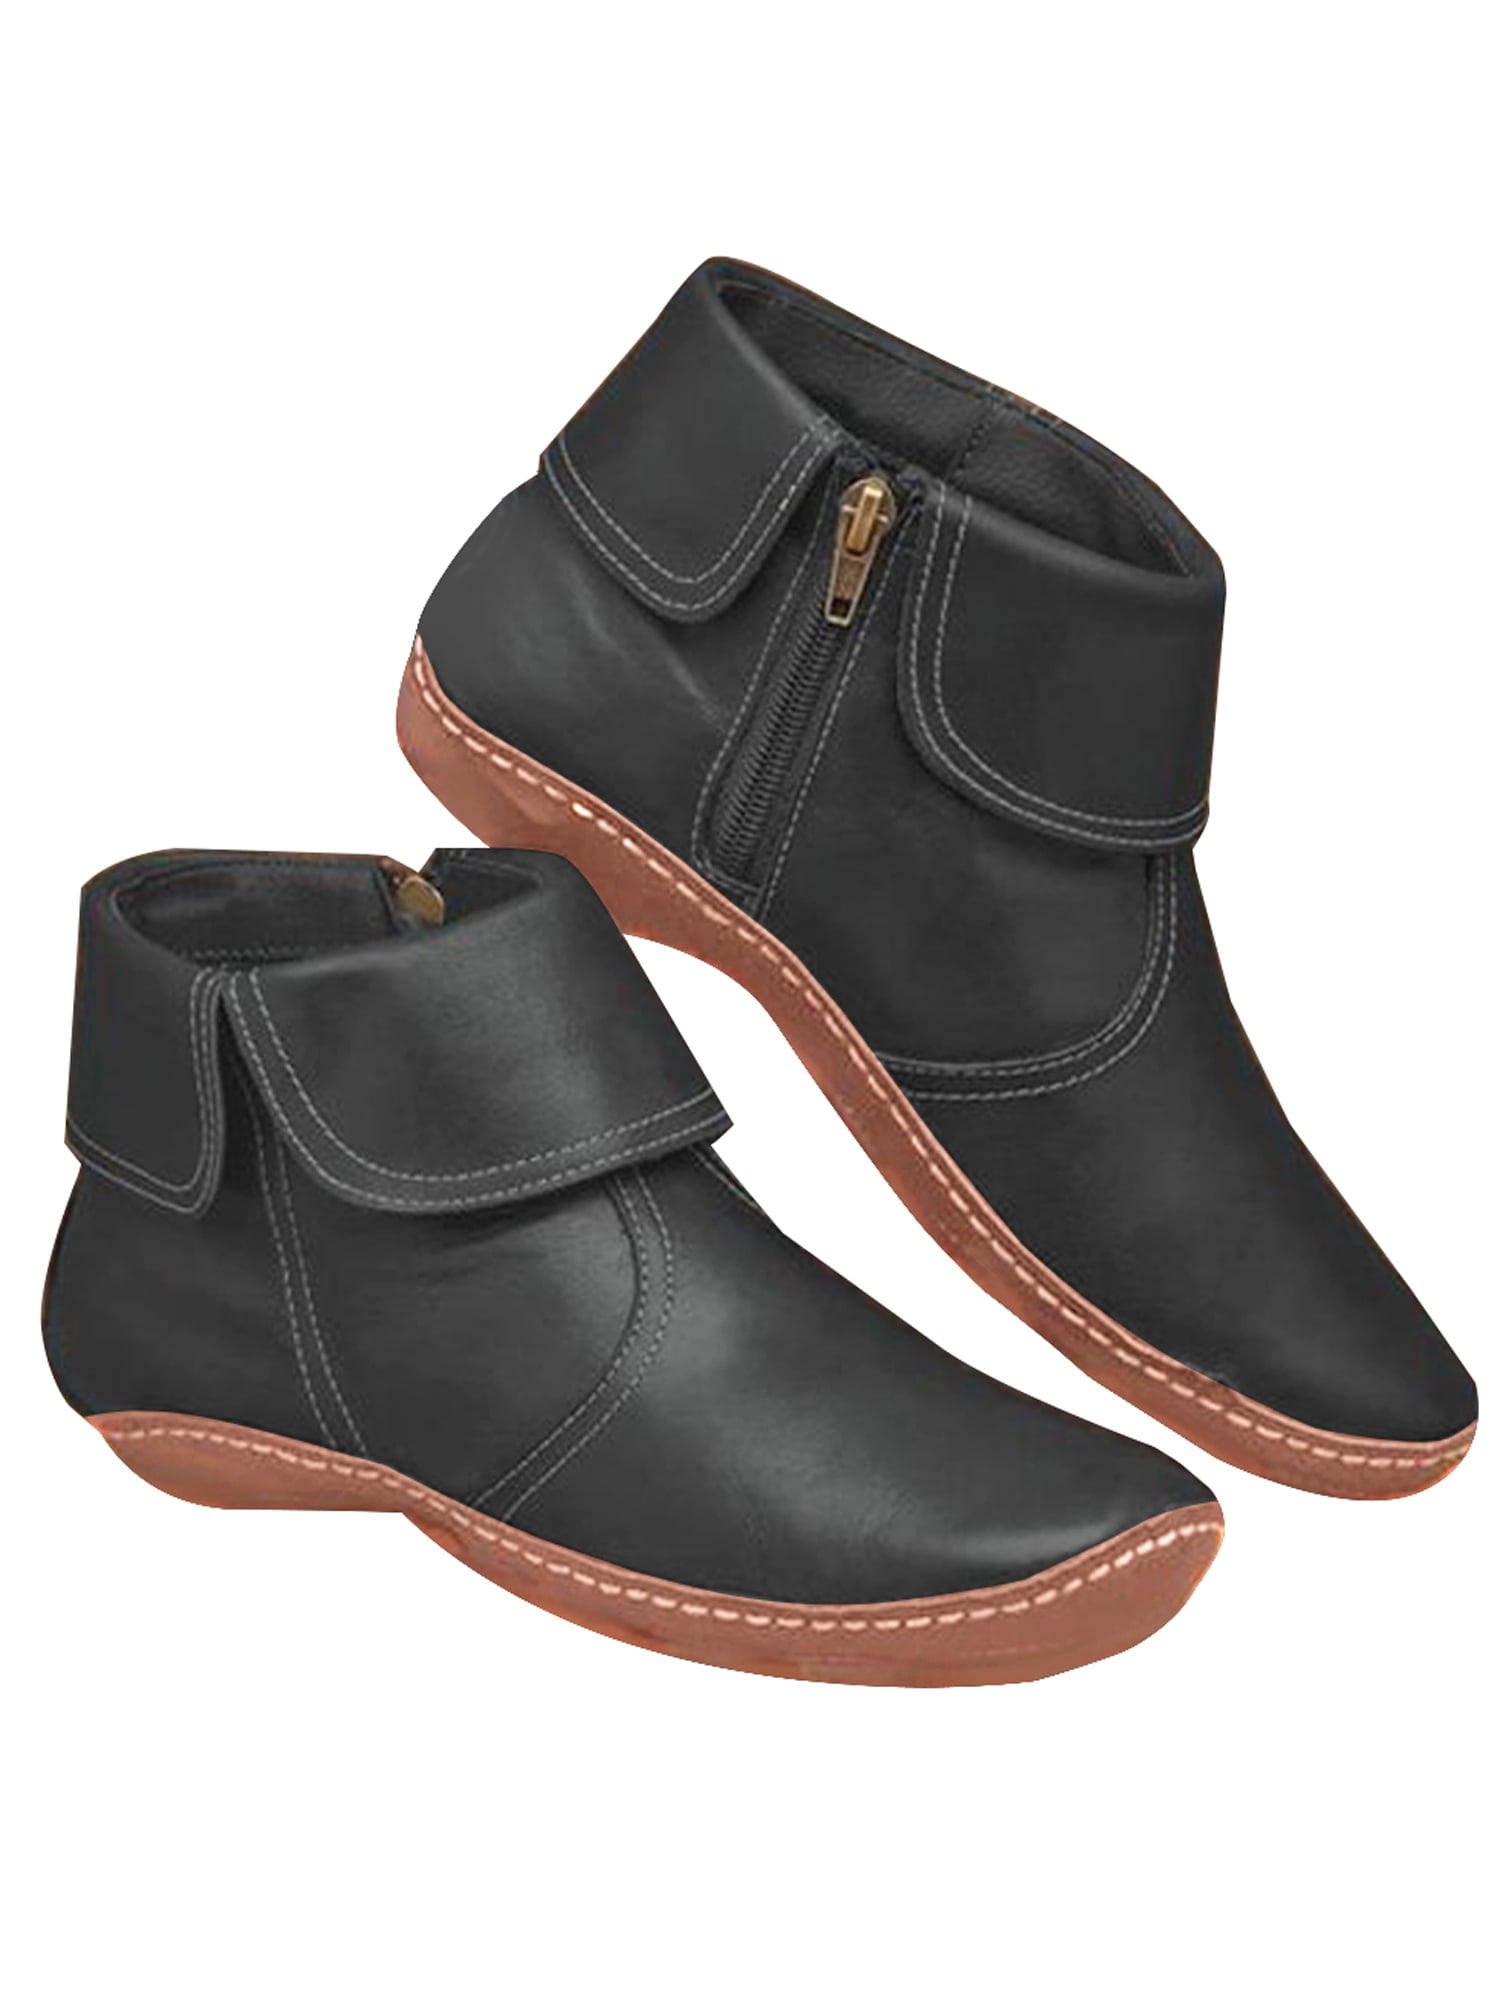 NEW Womens Shoes Ankle Boots Booties Slouch Cute Casual Flat Buckle Round Toe 